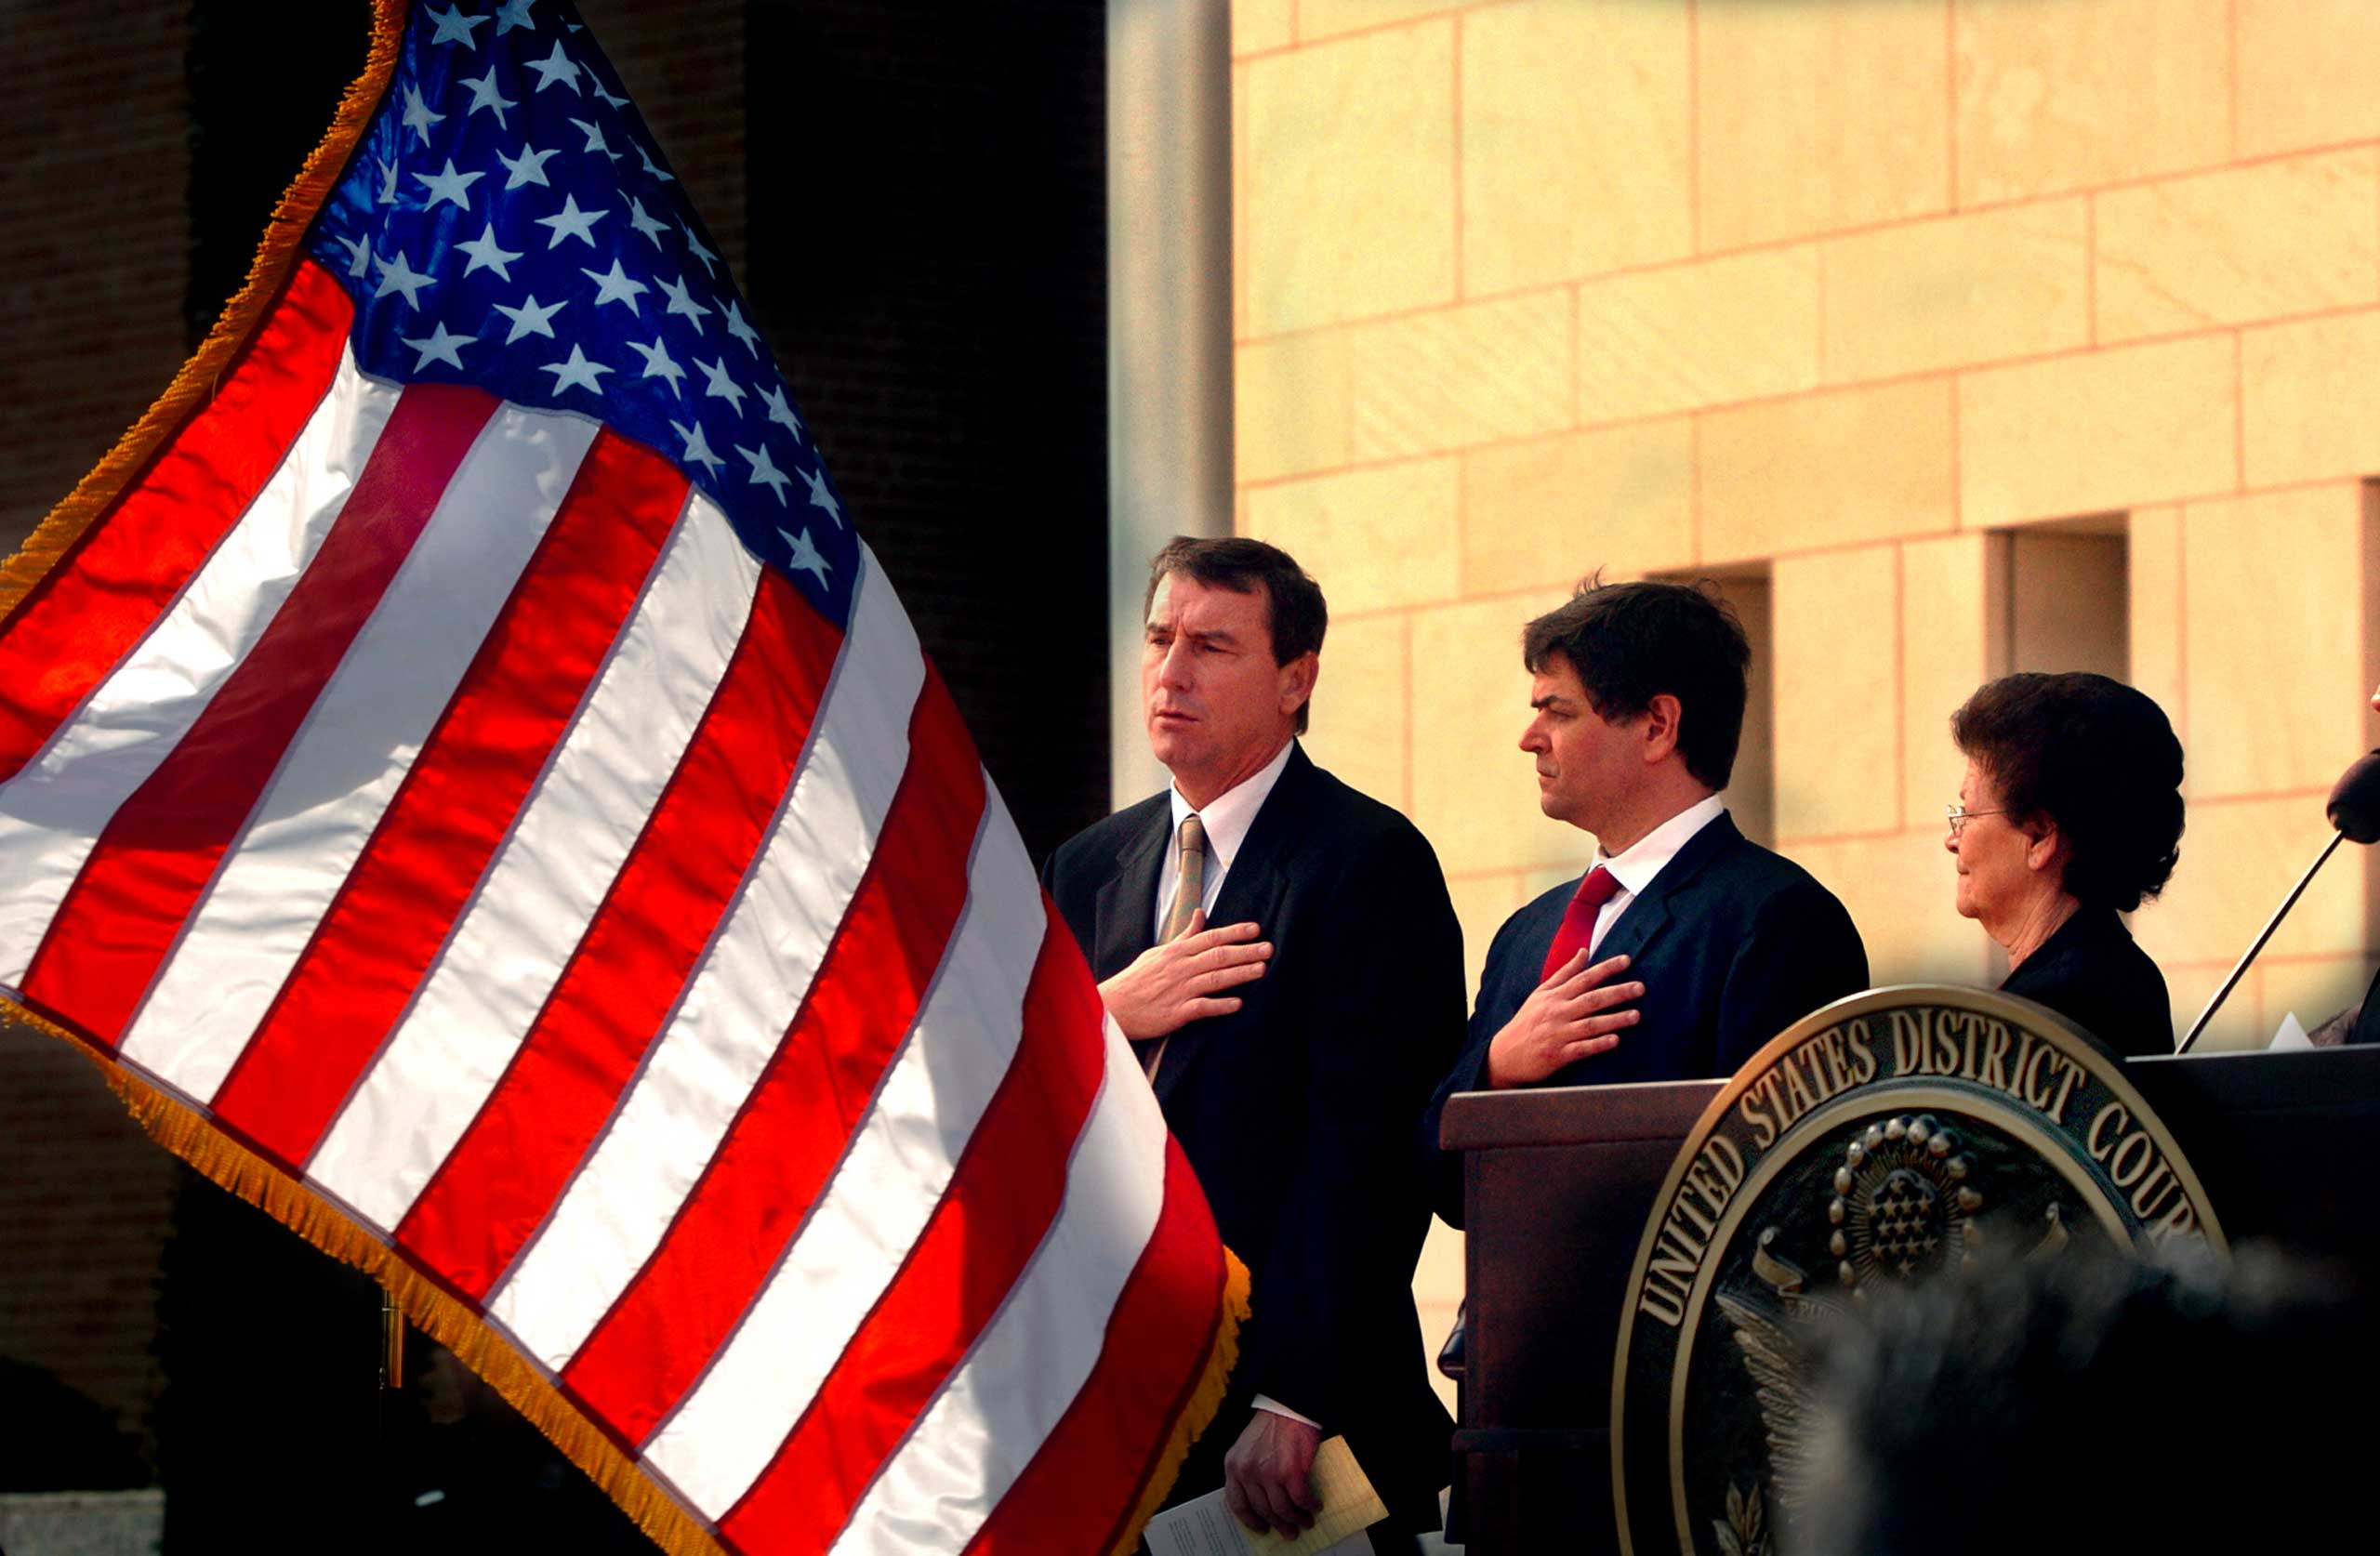 U.S. Southern District Judge Andrew S. Hanen, left, recites the Pledge of Allegiance during the United States Courthouse naming ceremony in Brownsville, Texas, Nov. 14, 2005. (Brad Doherty—Brownsville Herald/AP)